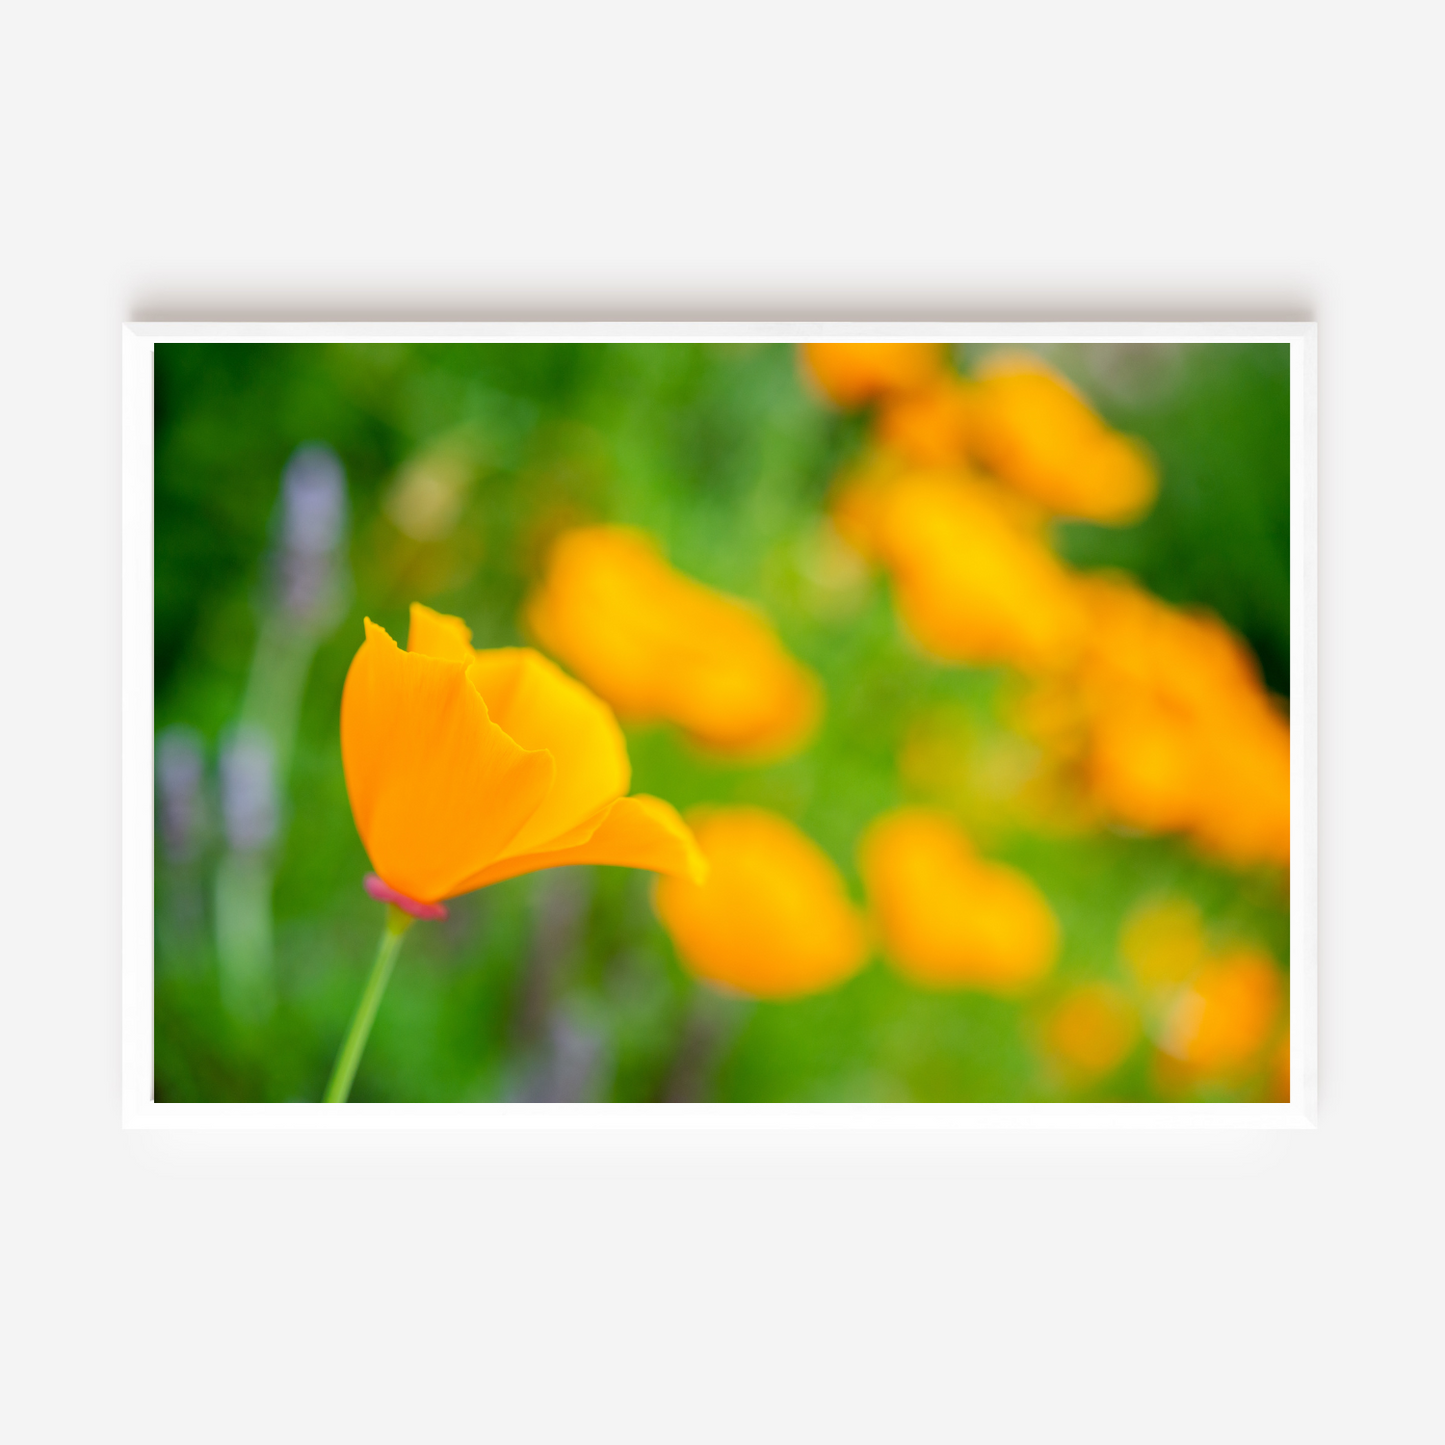 California's Golden Girls - Fine Art Photography - Art for your home or Office